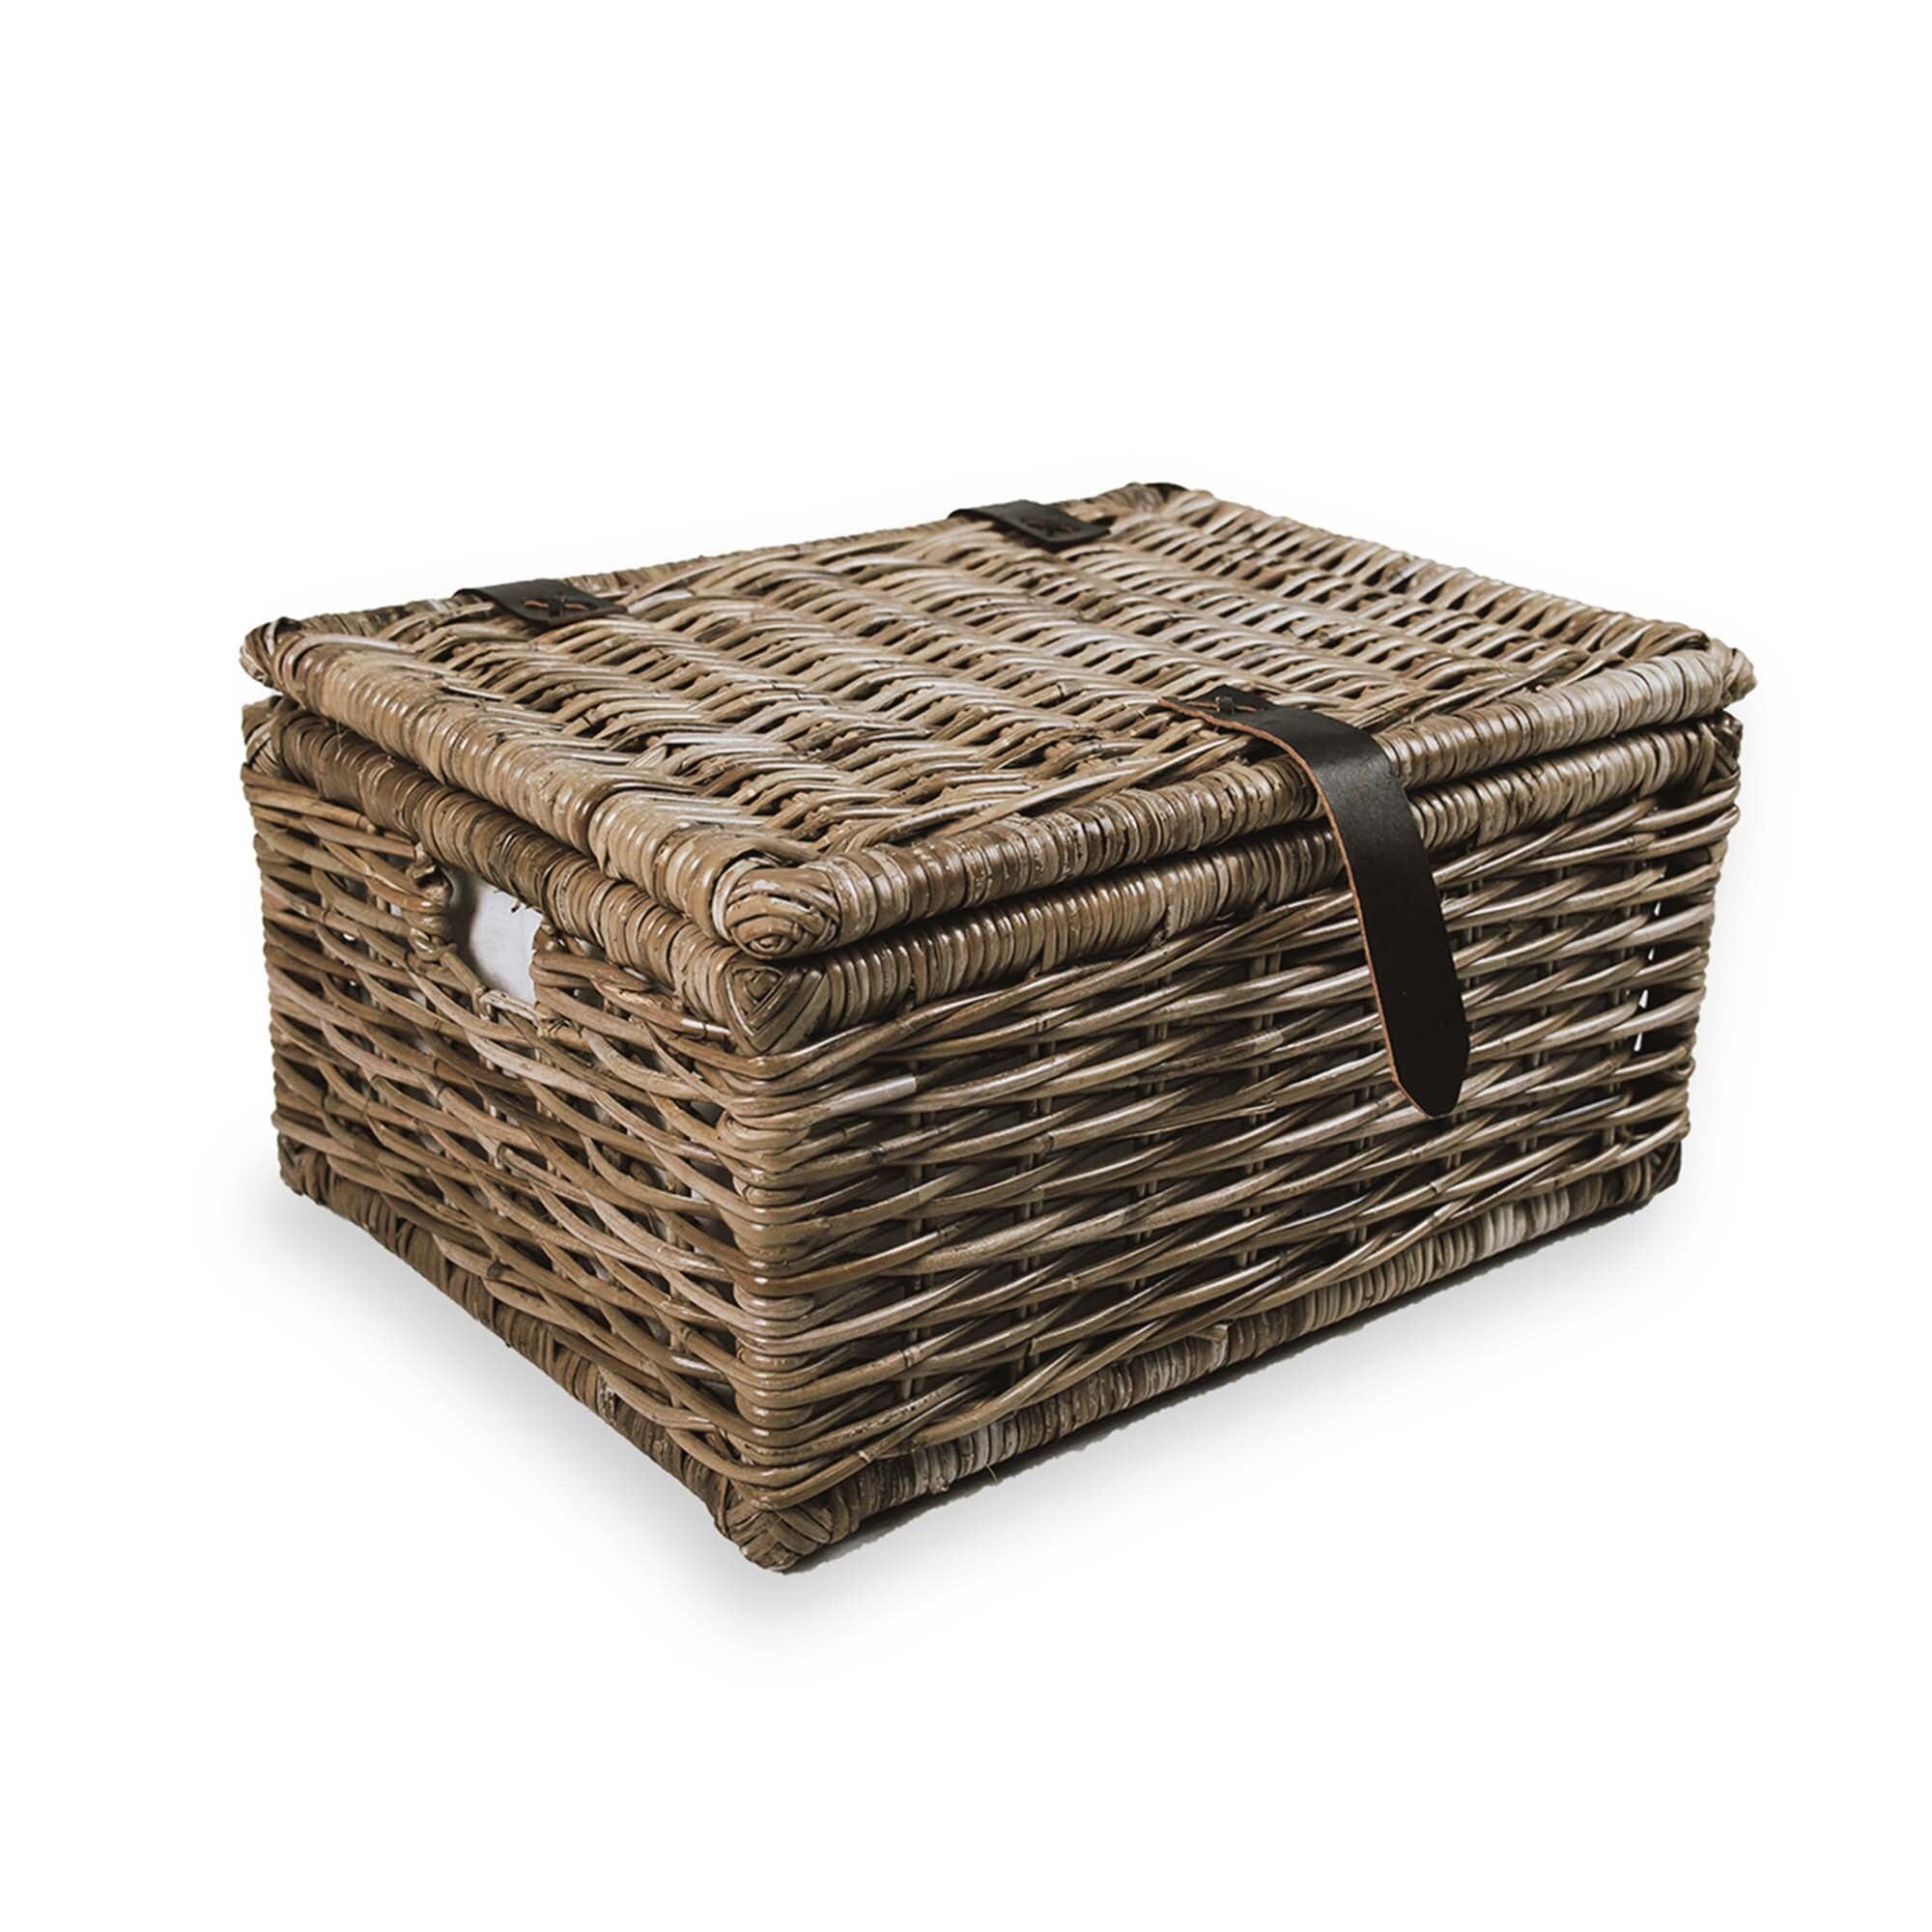 7 Liters With Lid Set with 2 Plastic Rattan Organizing Baskets for